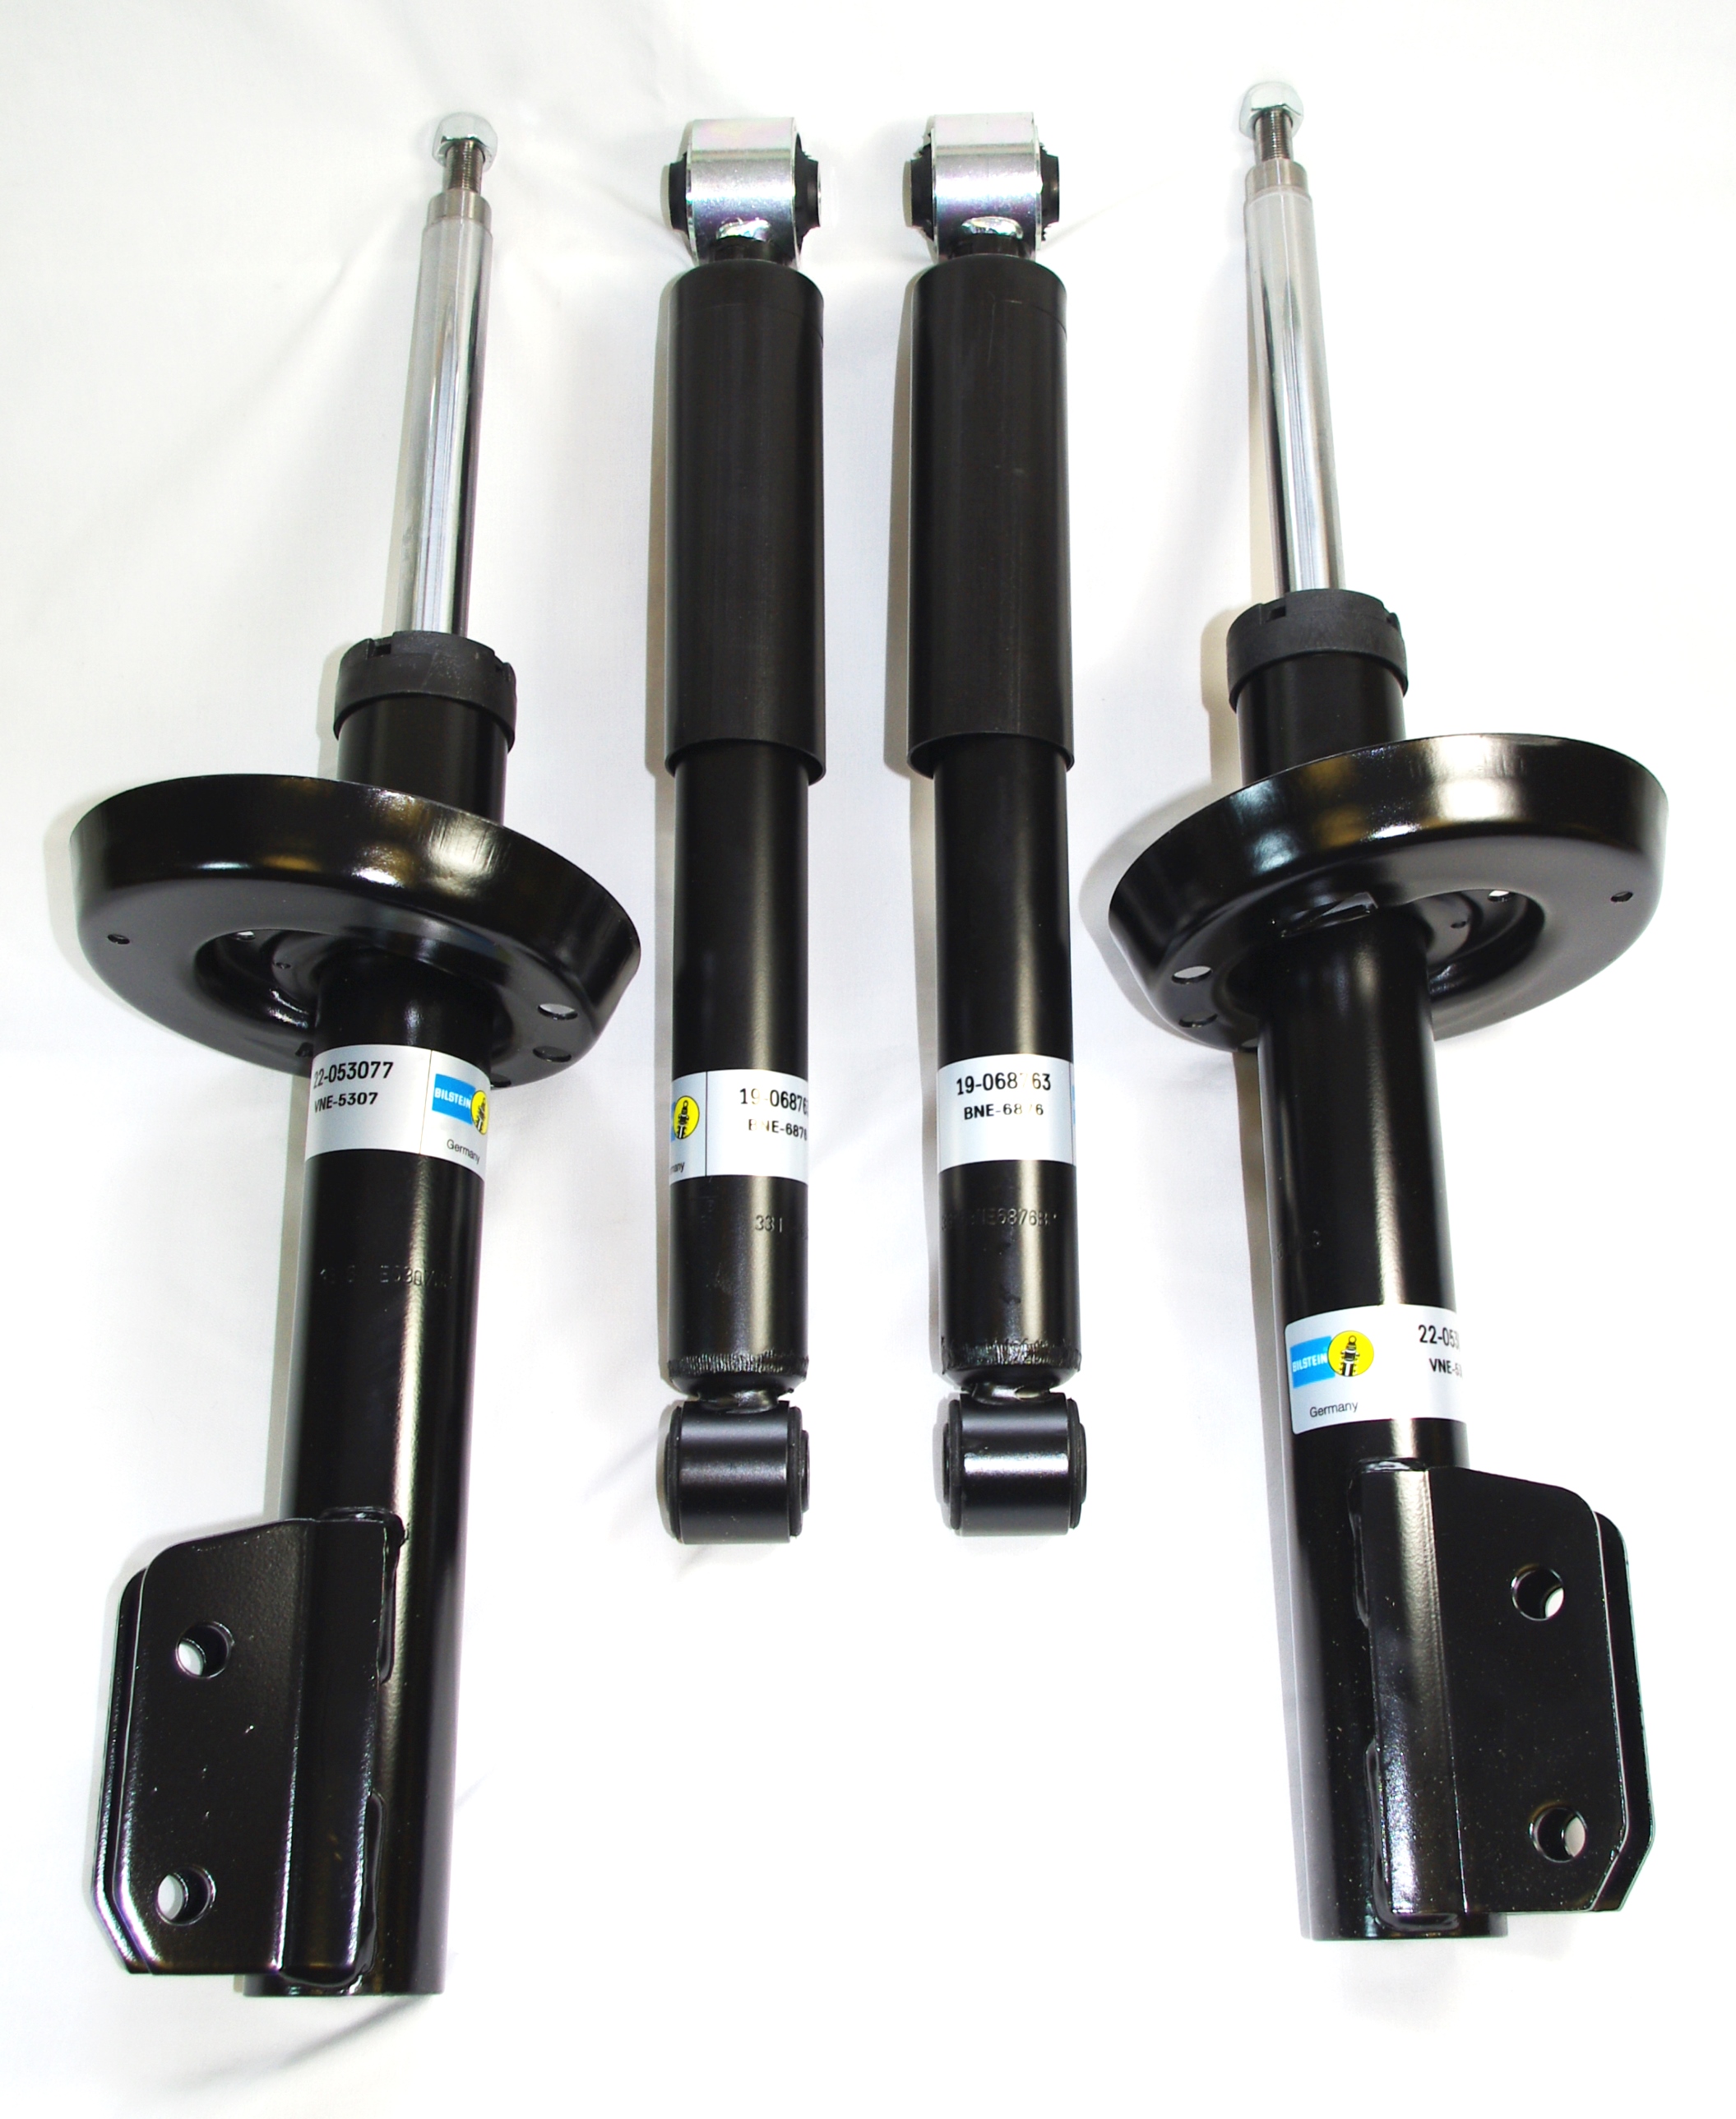 4x Bilstein B4 Front & Rear Shock Absorbers For VAUXHALL ASTRA G Mk4 98- 2.0 22-053077, 22-053060, 19-068756